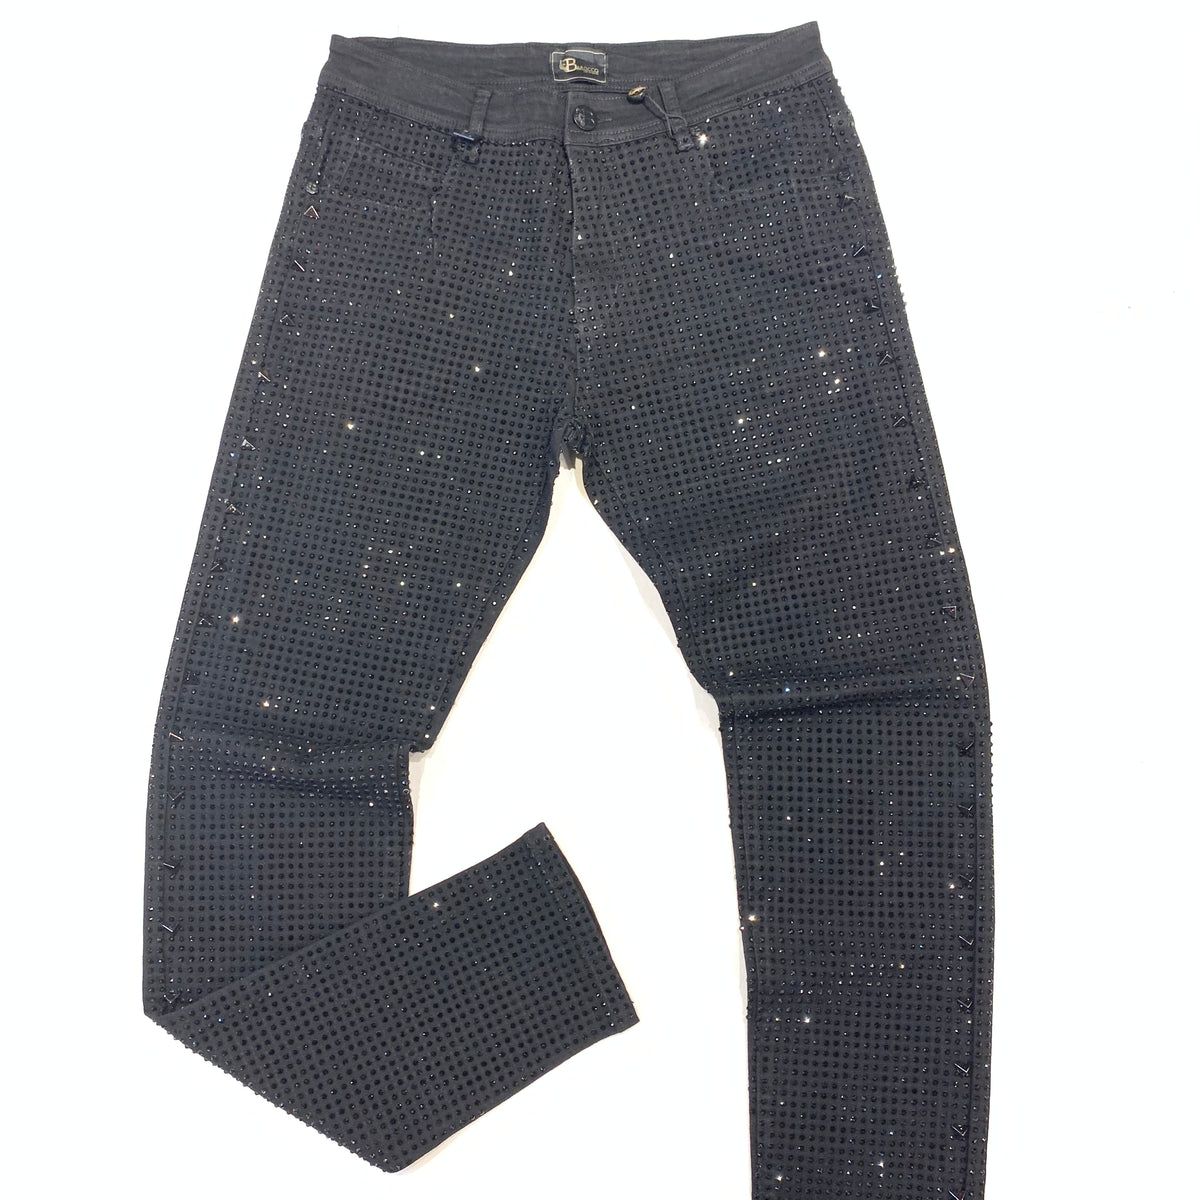 Barocco Men's Black Fully Loaded Crystal Spiked Jeans - Dudes Boutique